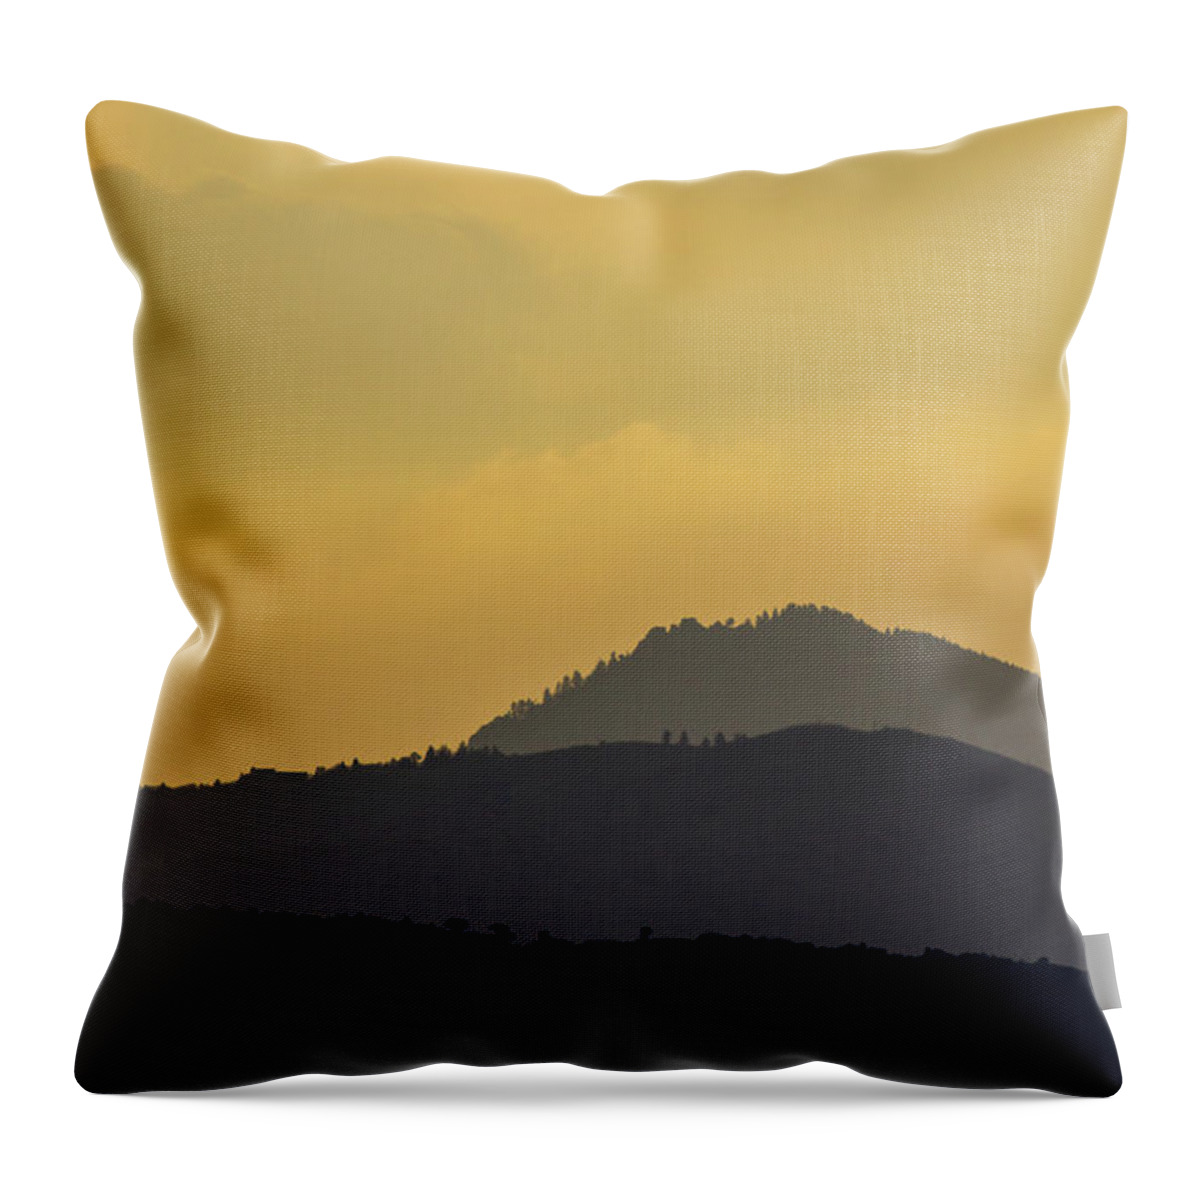 America Throw Pillow featuring the photograph Silhouettes by John De Bord